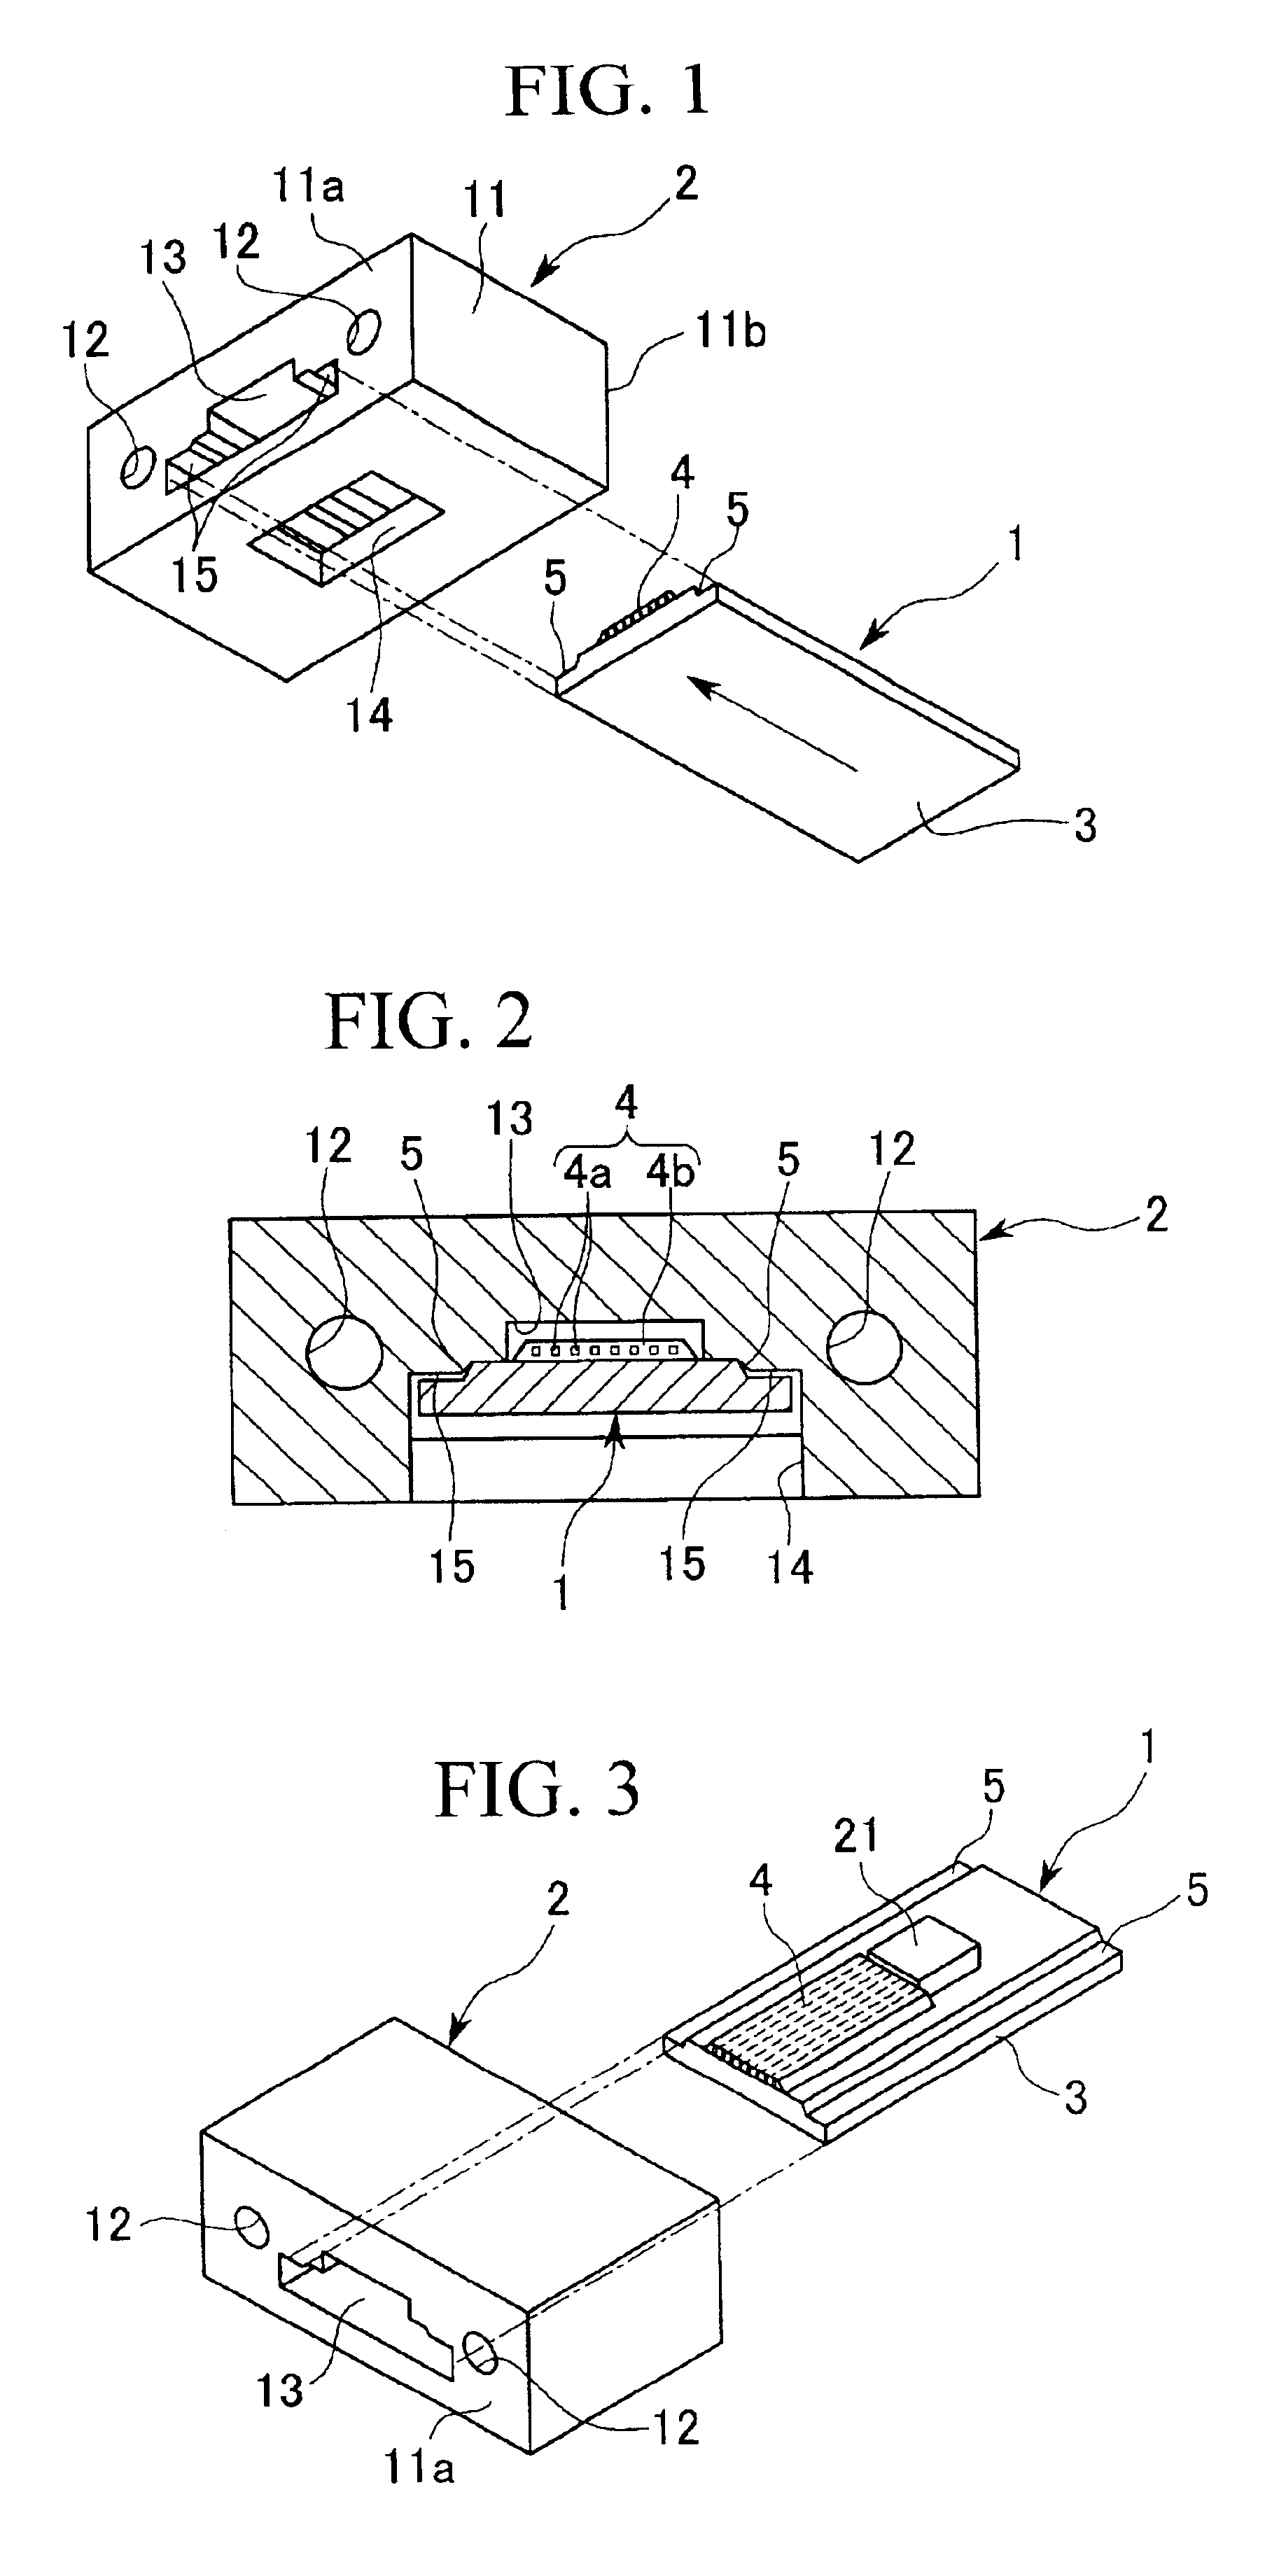 Substrate, optical fiber connection end member, optical element housing member, and method of fabrication of an optical module and the substrate